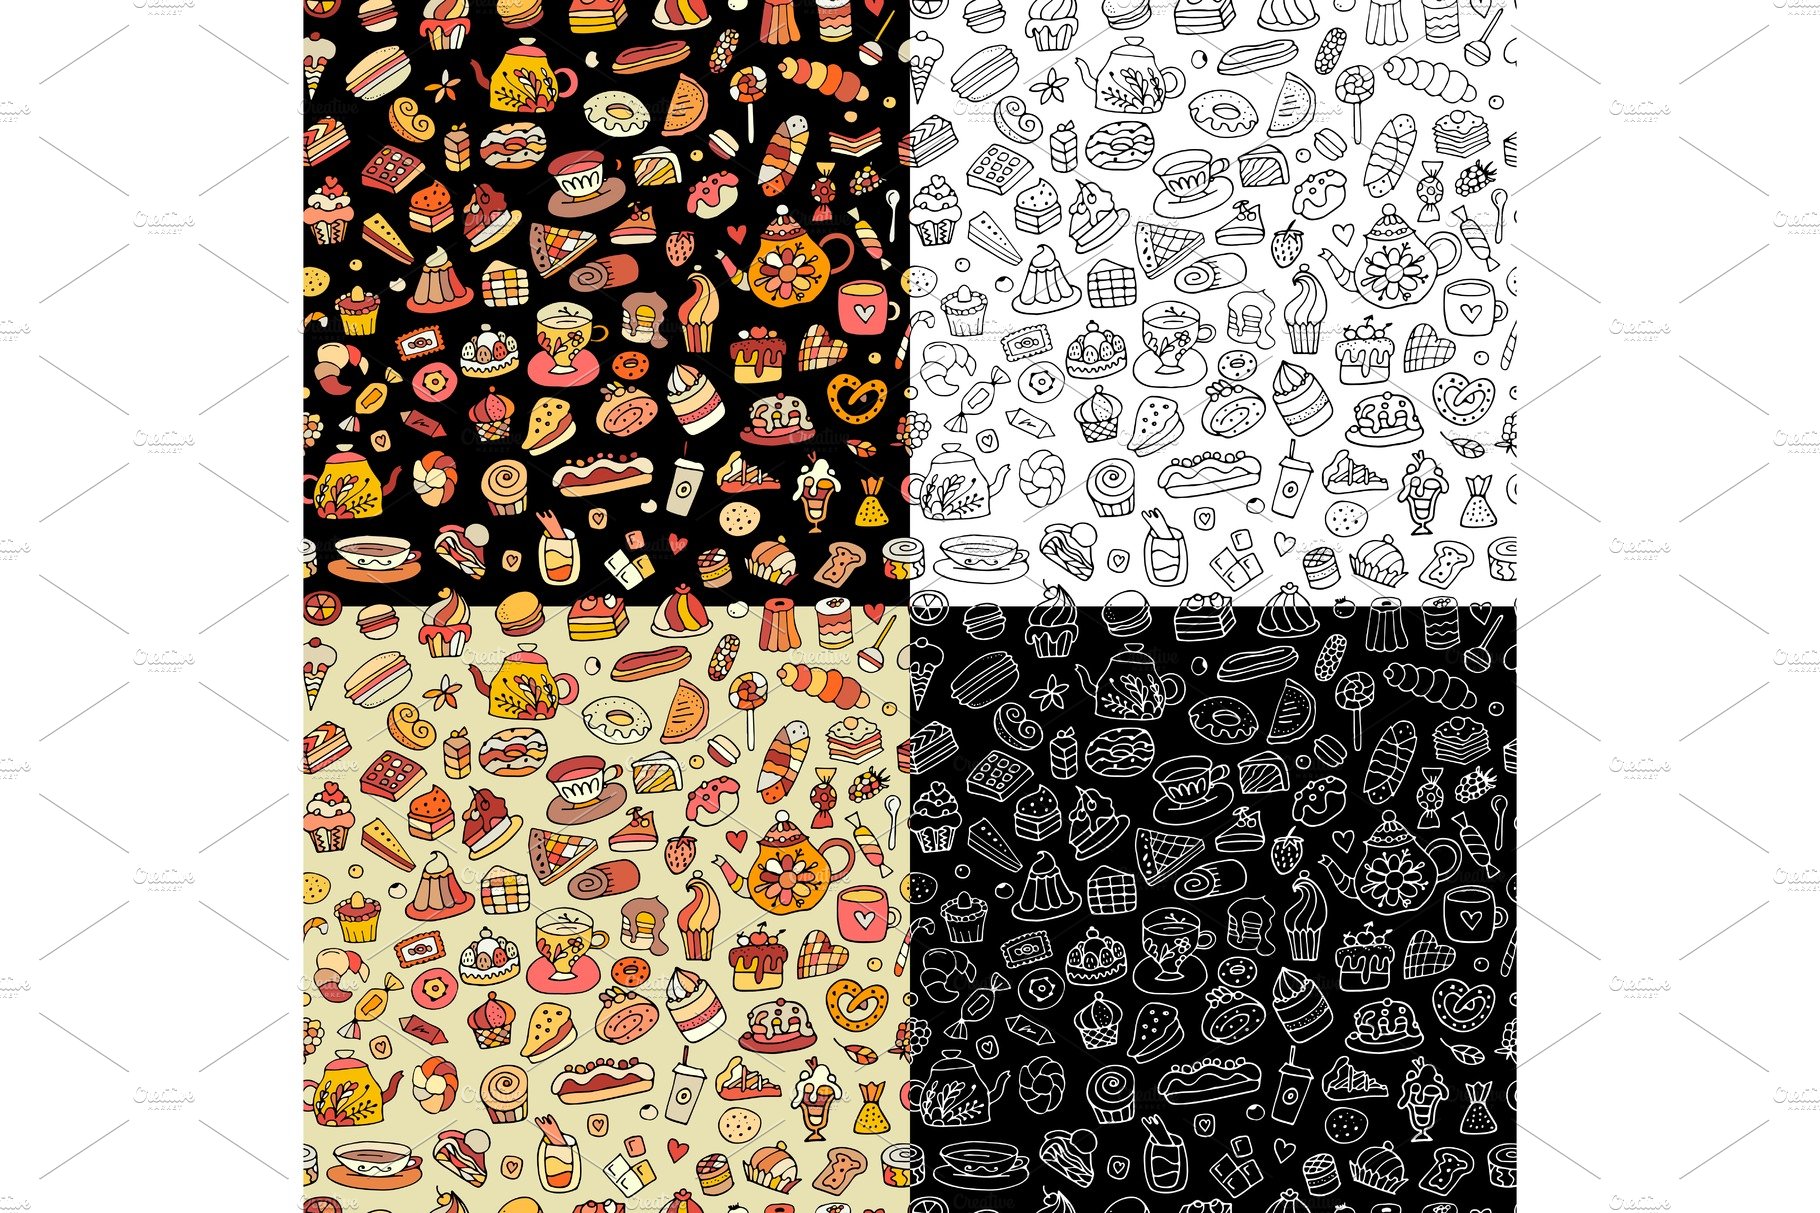 Cakes and sweets, seamless pattern cover image.